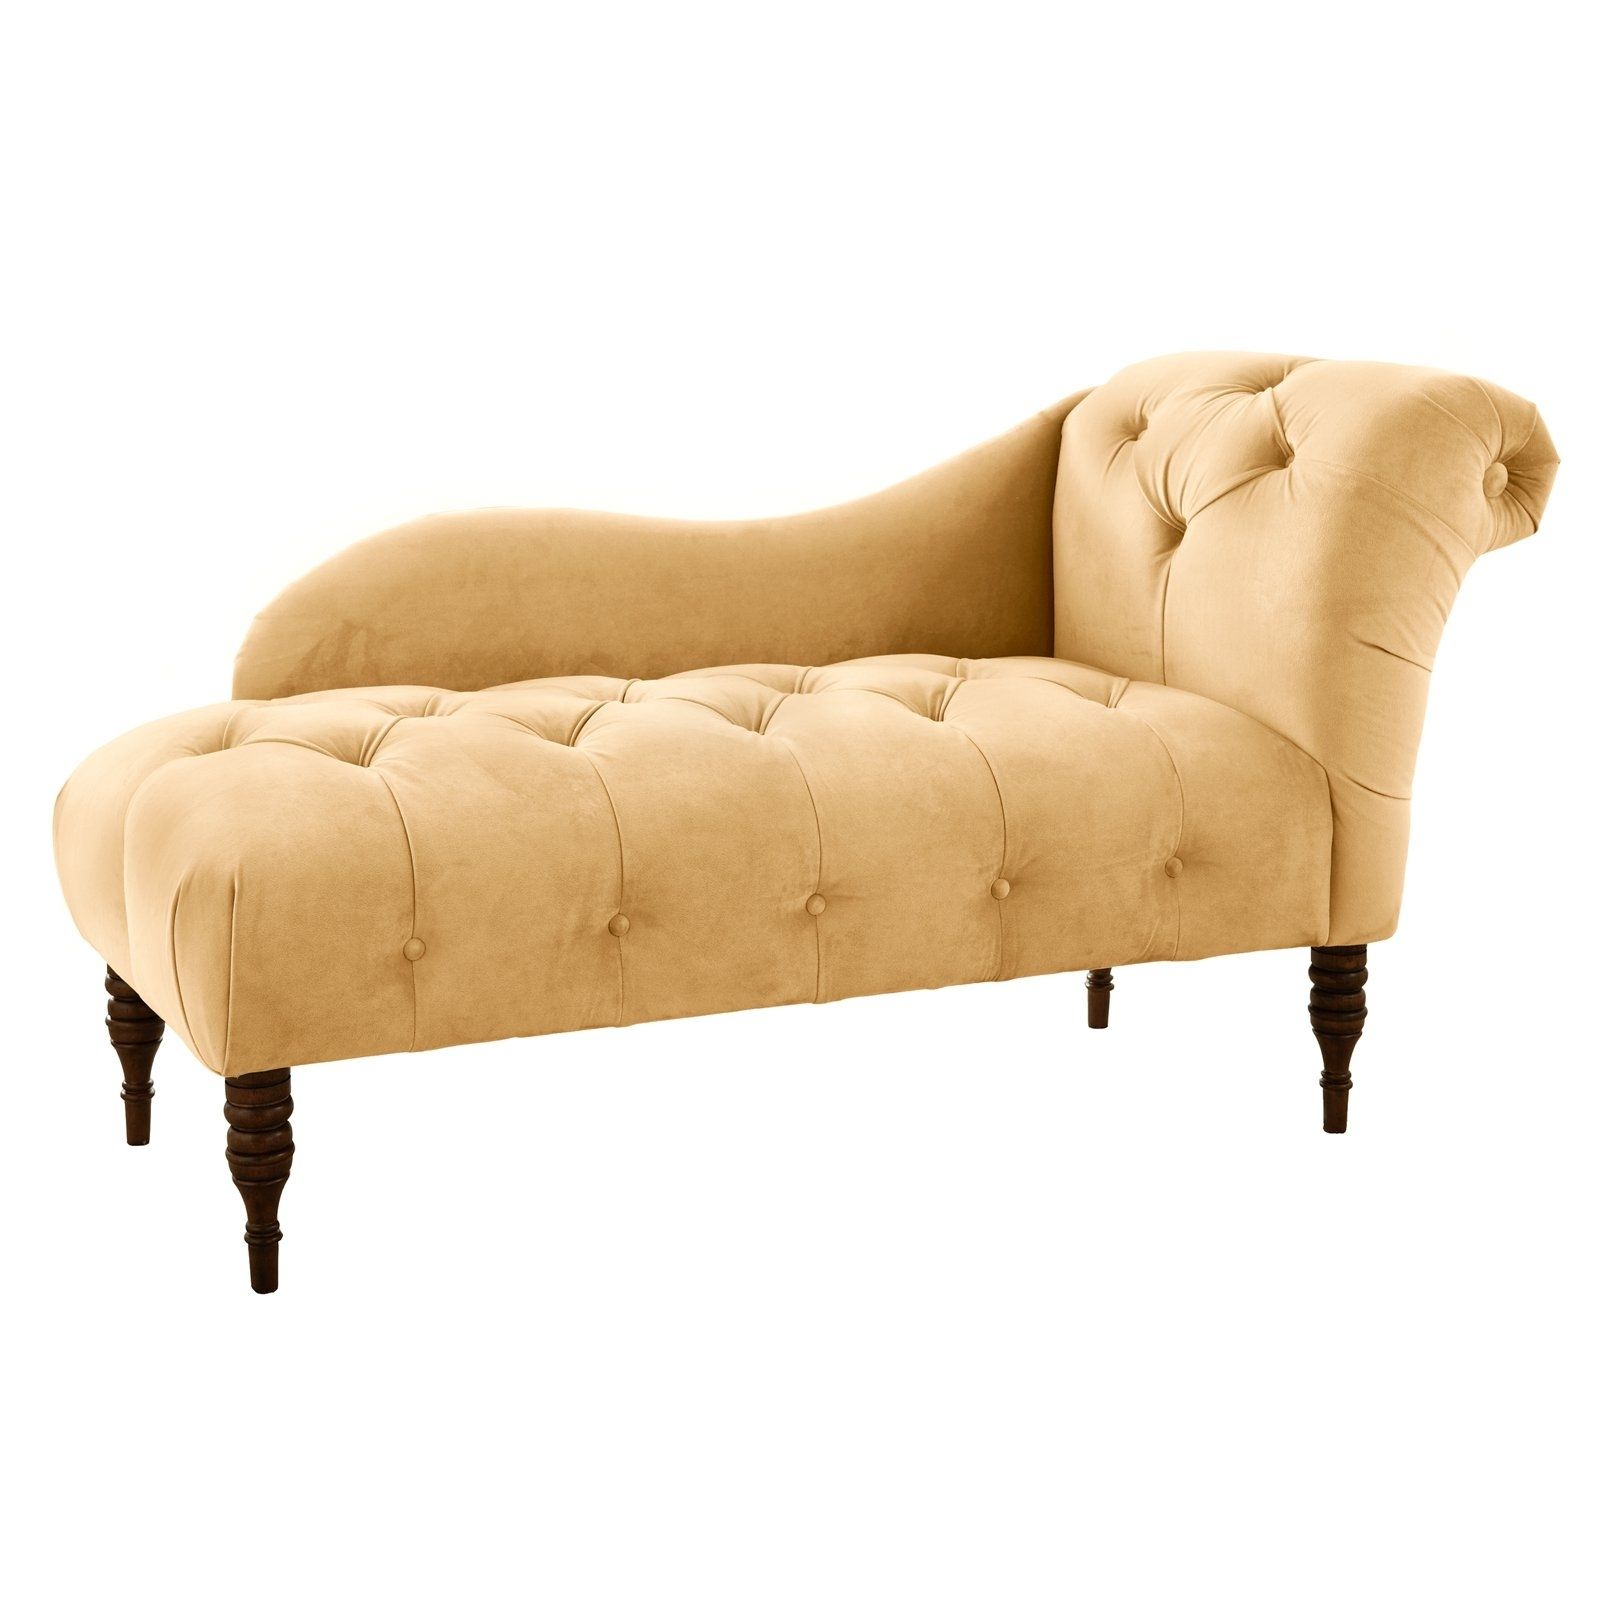 Tufted Chaise Lounge Chairs Intended For Famous Madison Tufted Chaise Lounge (Photo 2 of 15)